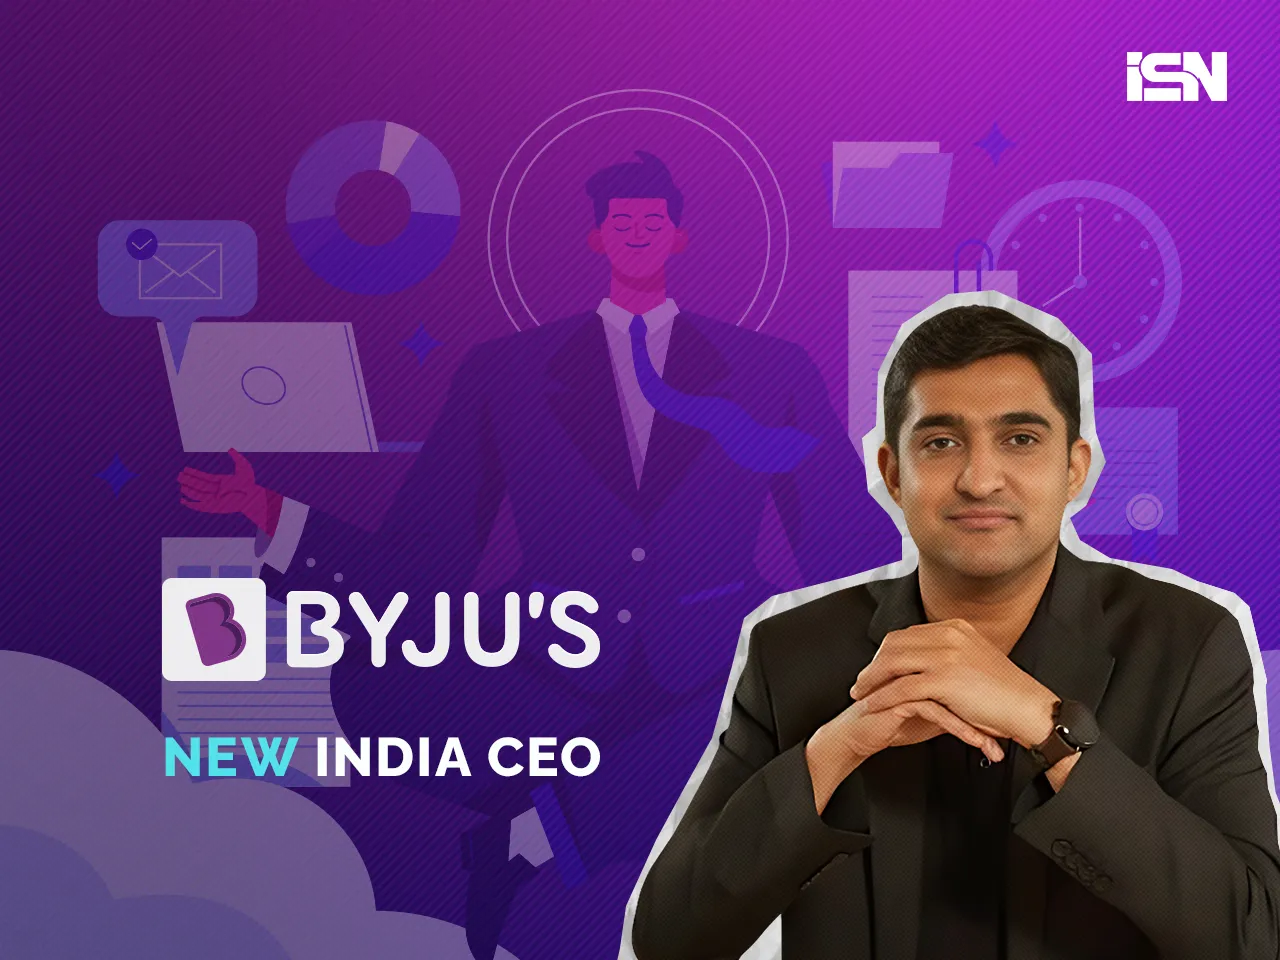 Arjun Mohan joins BYJU’S as India CEO